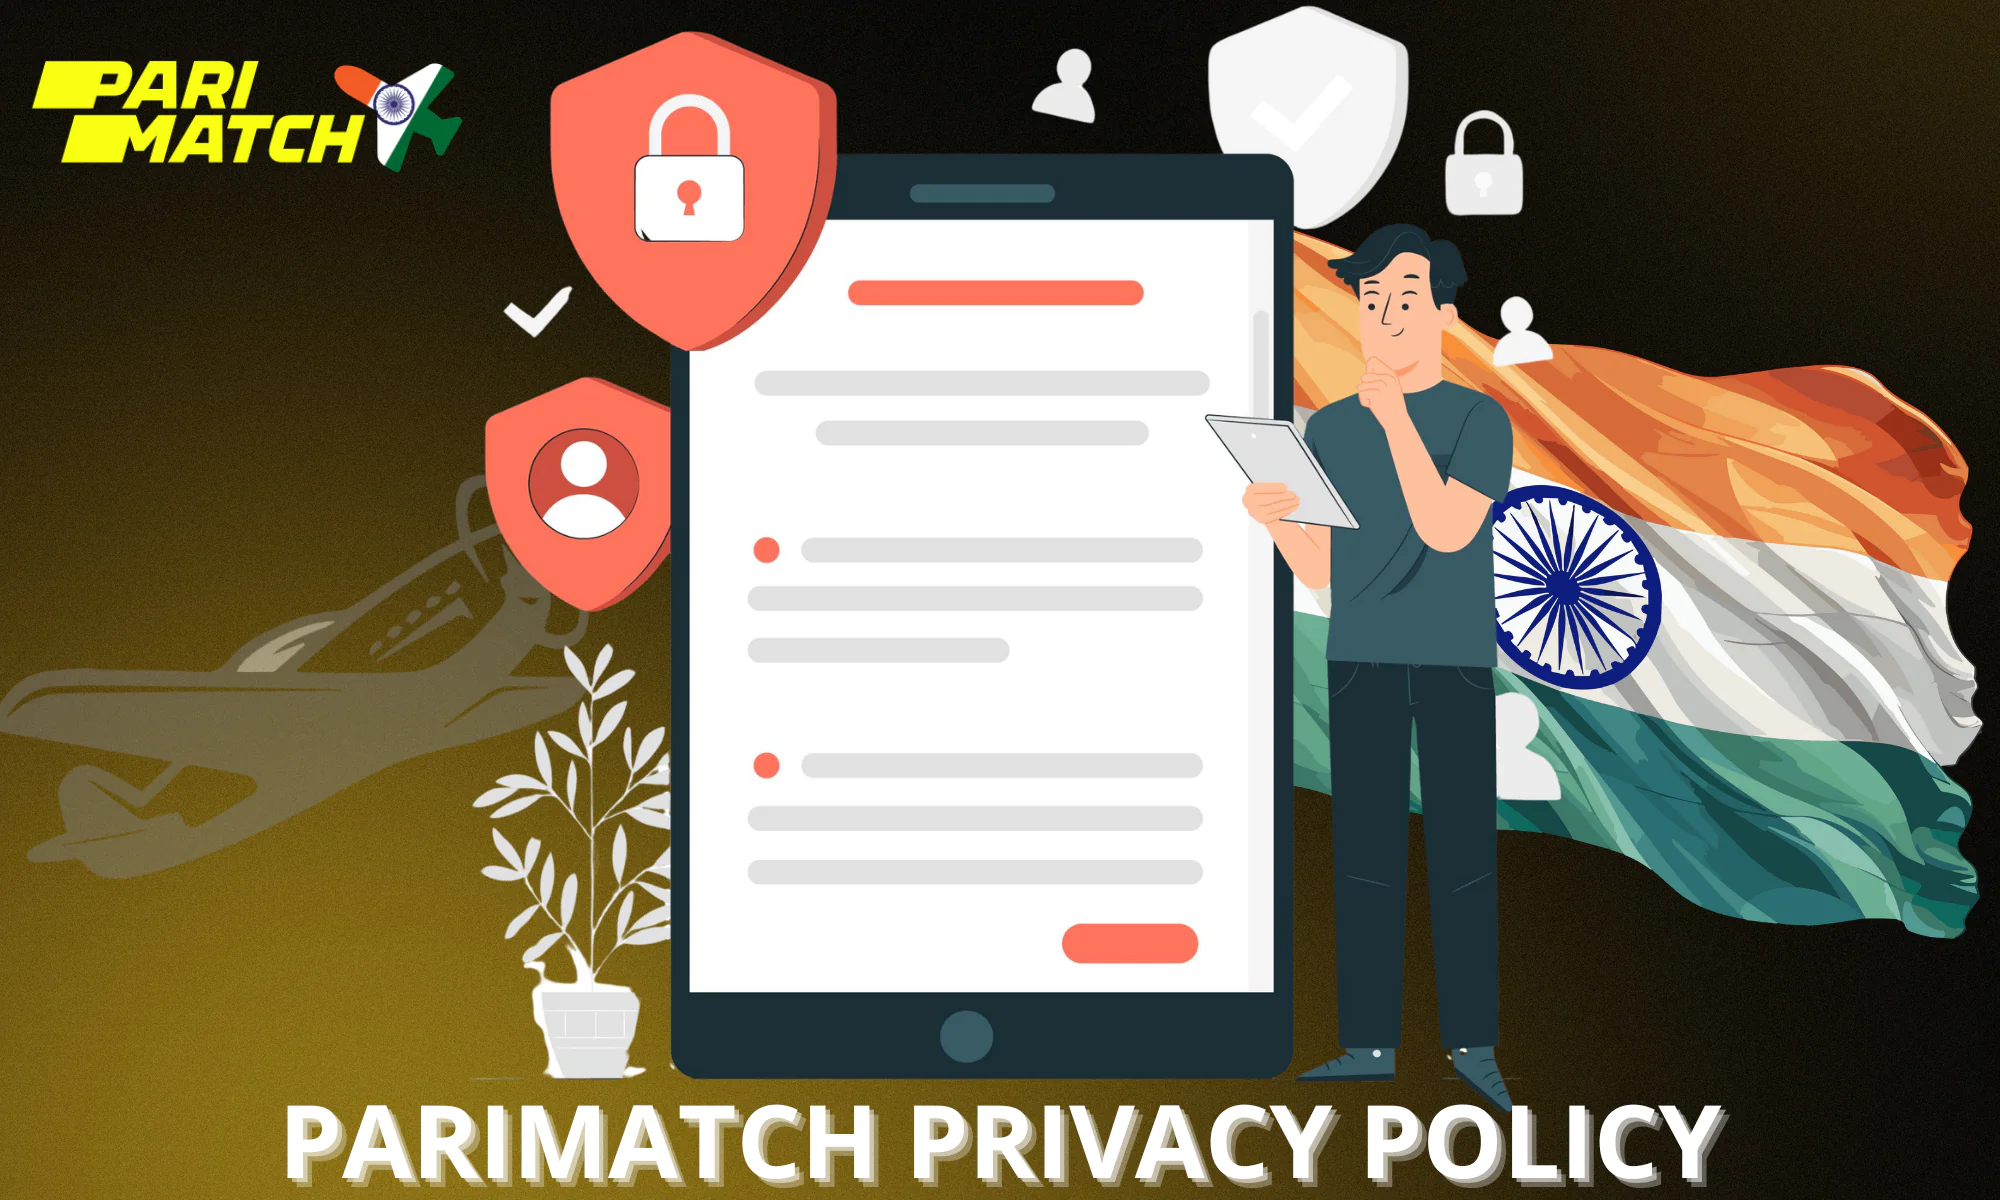 Parimatch has a specially developed privacy policy for players from India